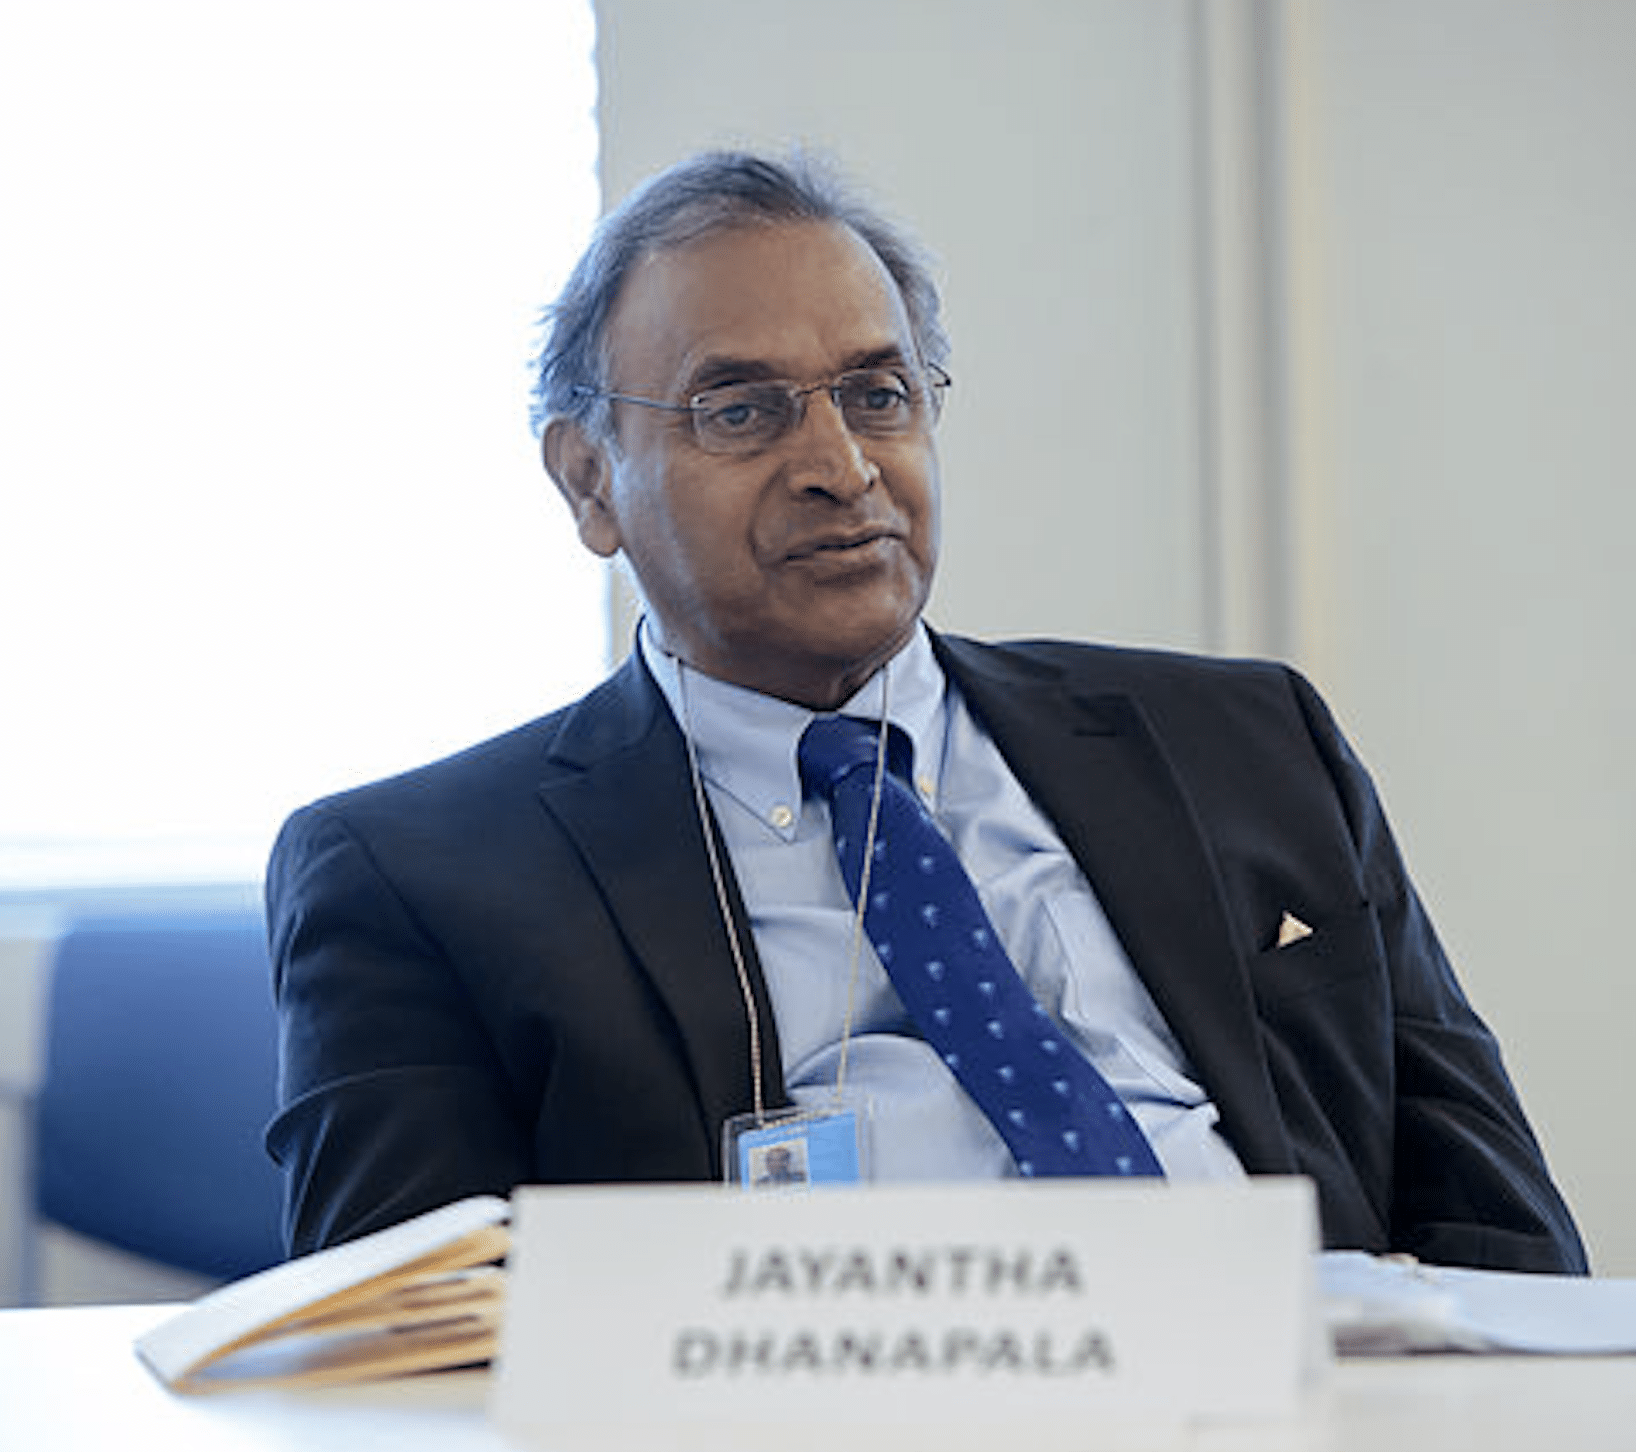 Jayantha Dhanapala, former UN Under-Secretary General for Disarmament Affairs and a member of the Group of Eminent Persons (GEM) | Credit: The Official CTBTO Photostream | CC BY 2.0